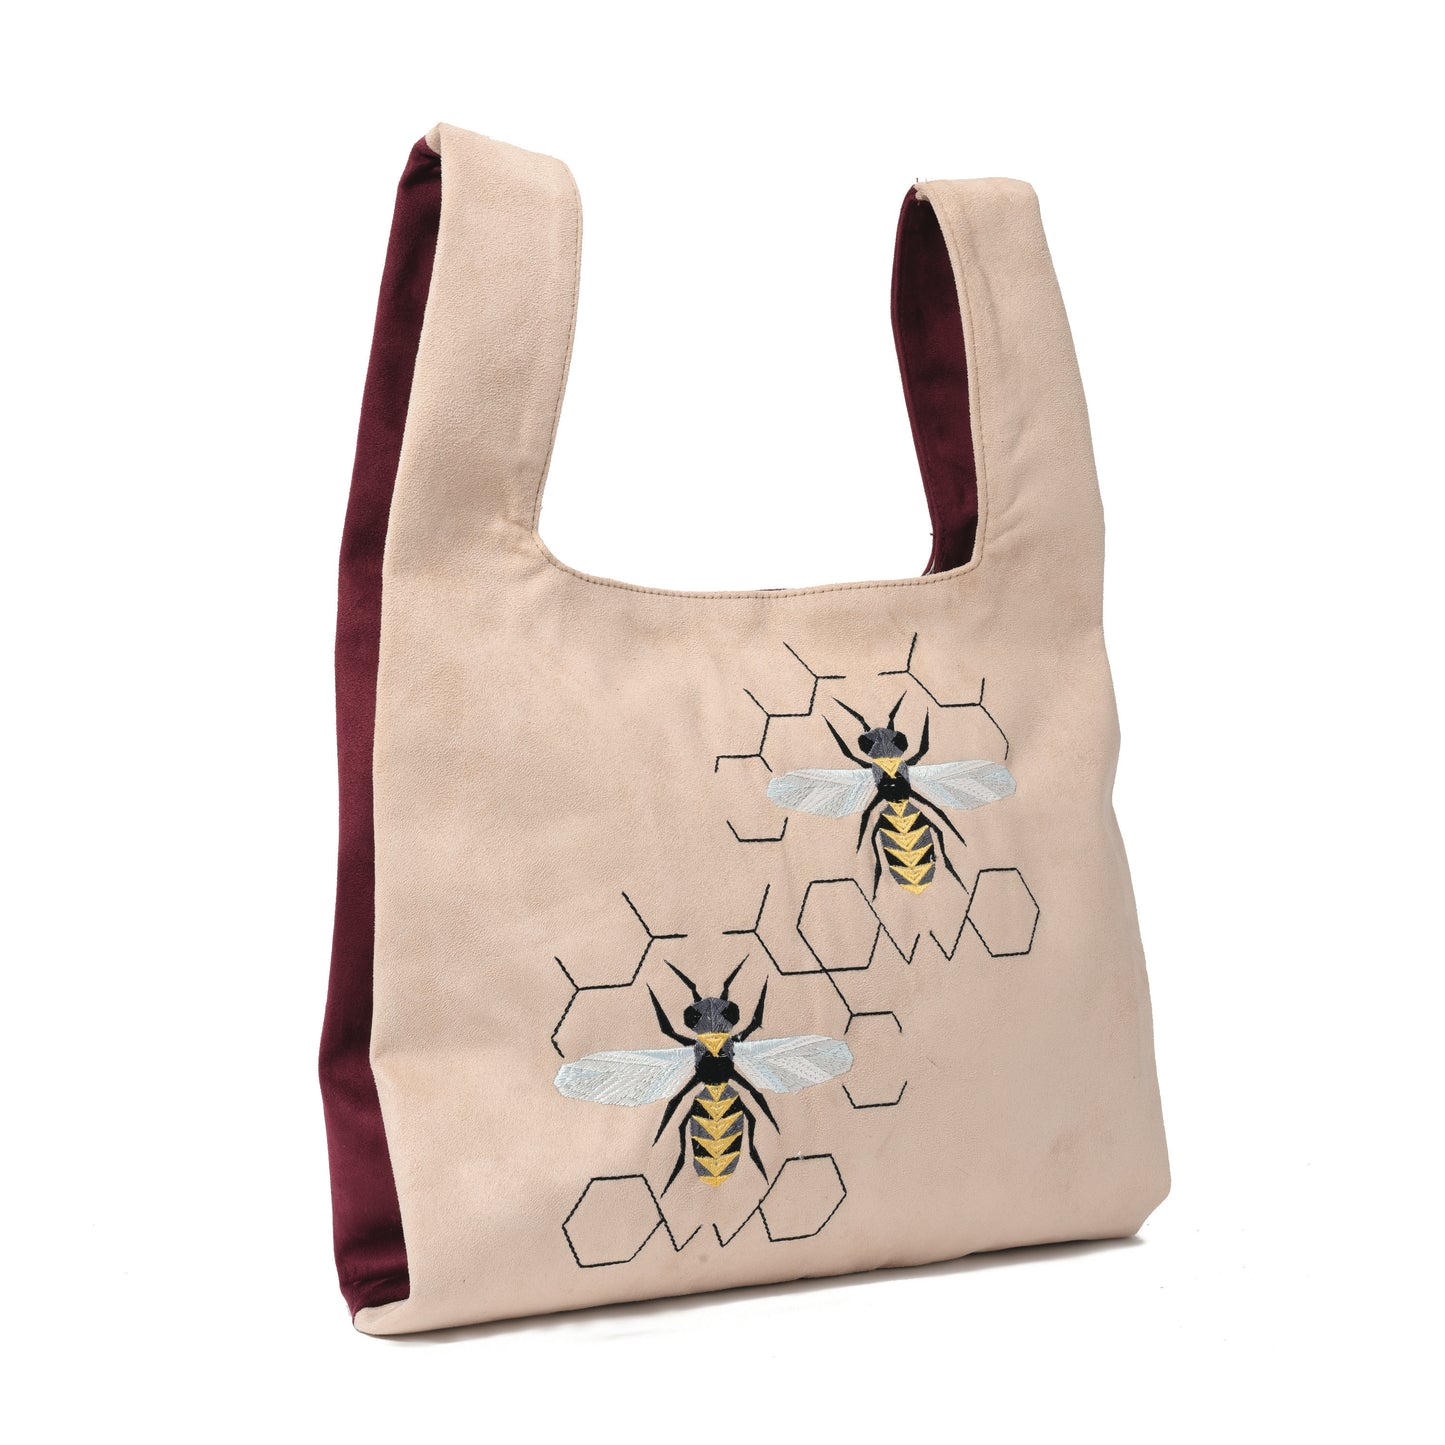 Knot Beige/burgundy Handbag with Bees embroidery - Code 920